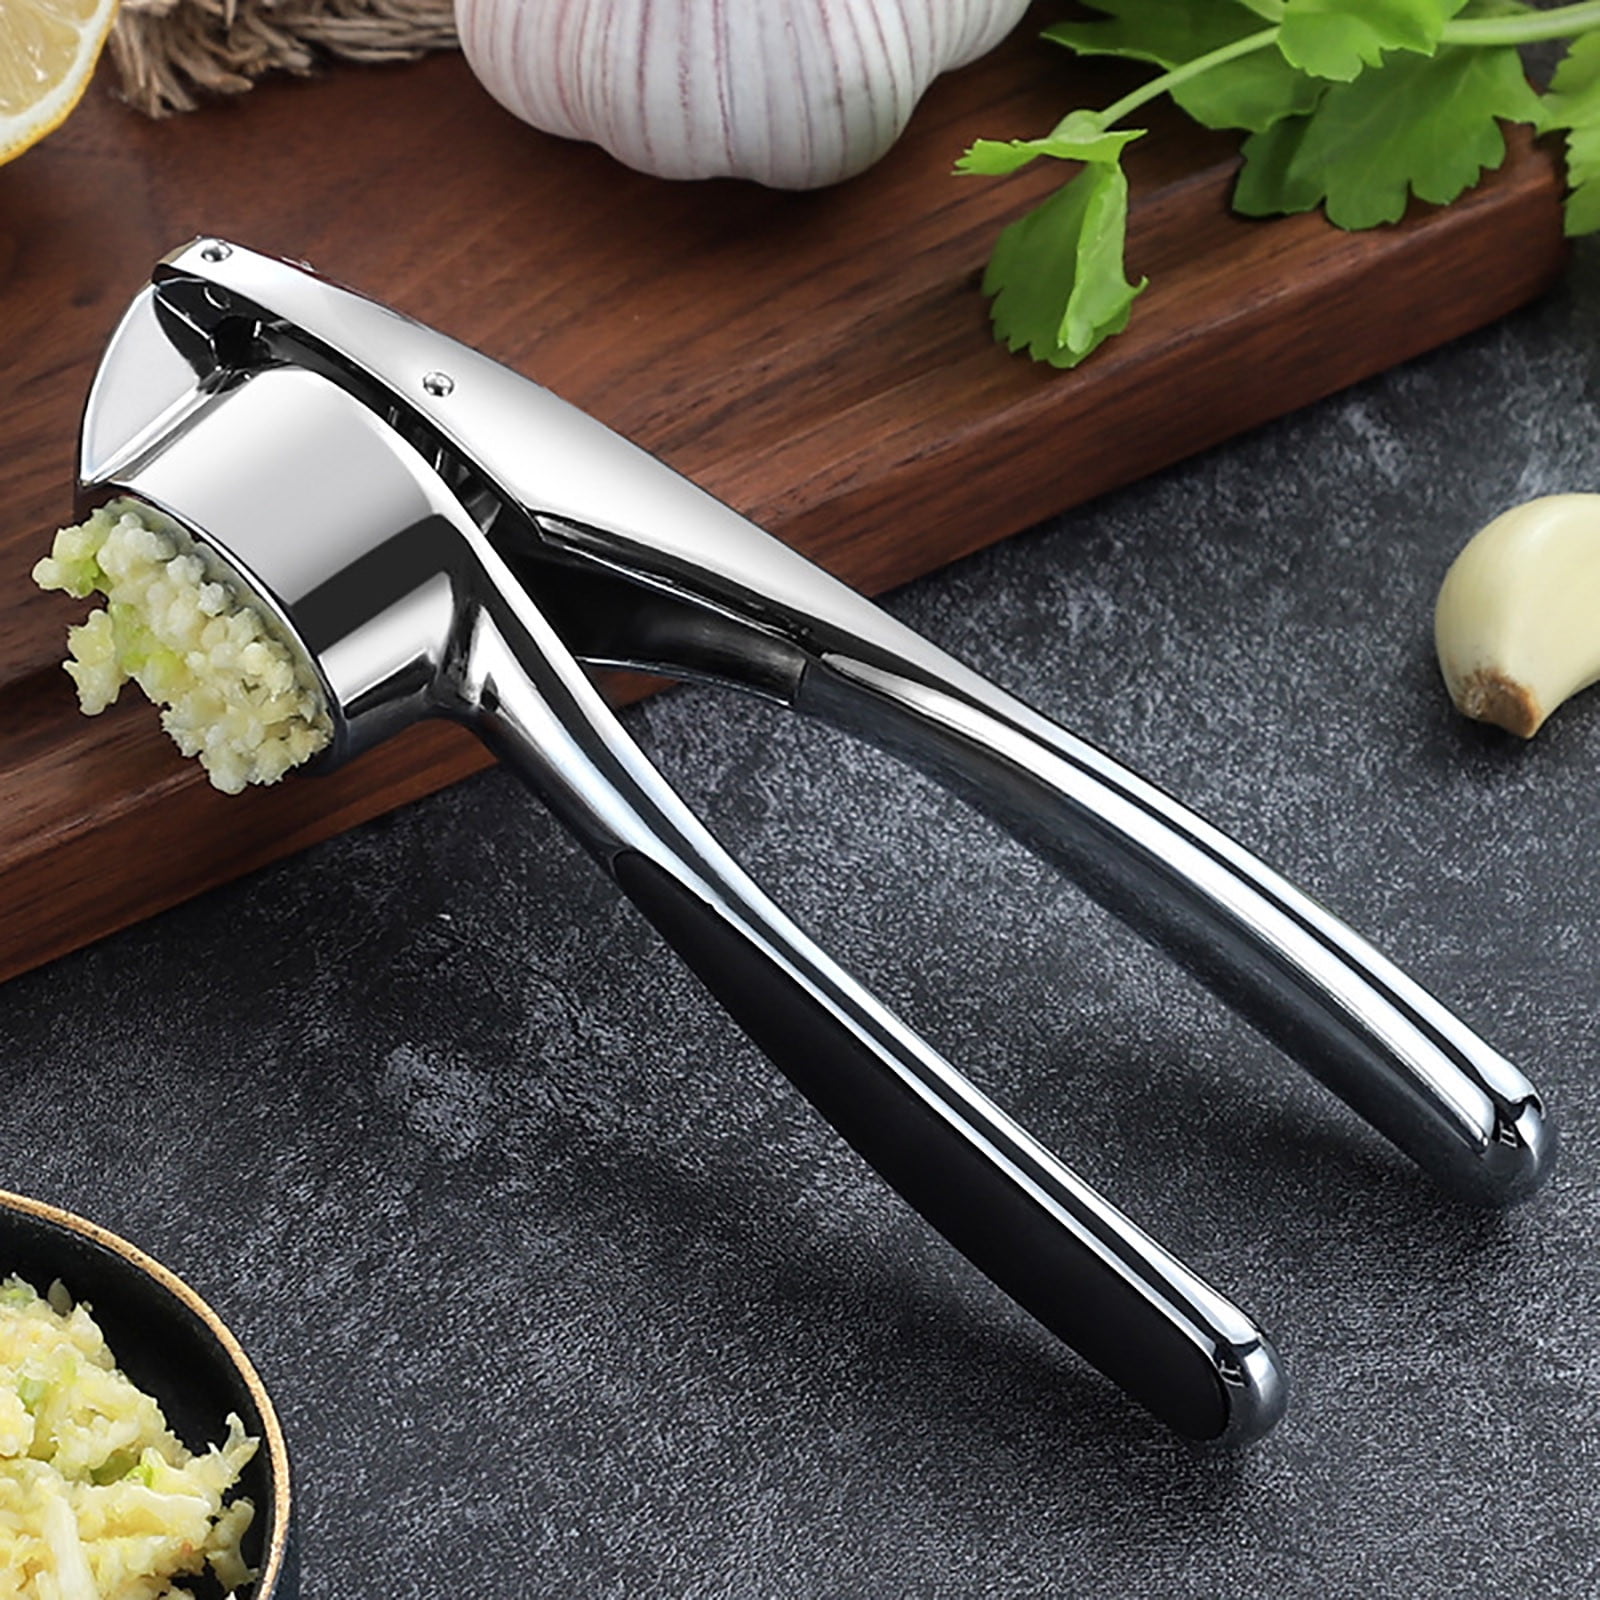 Kitchen Premium Garlic Press with Soft, Easy to Squeeze Handle Includes  Silicone Garlic Peeler & Cleaning Brush - 3 Piece Garlic Mincer Tool -  Sturdy Ea - China Food Chopper and Manual